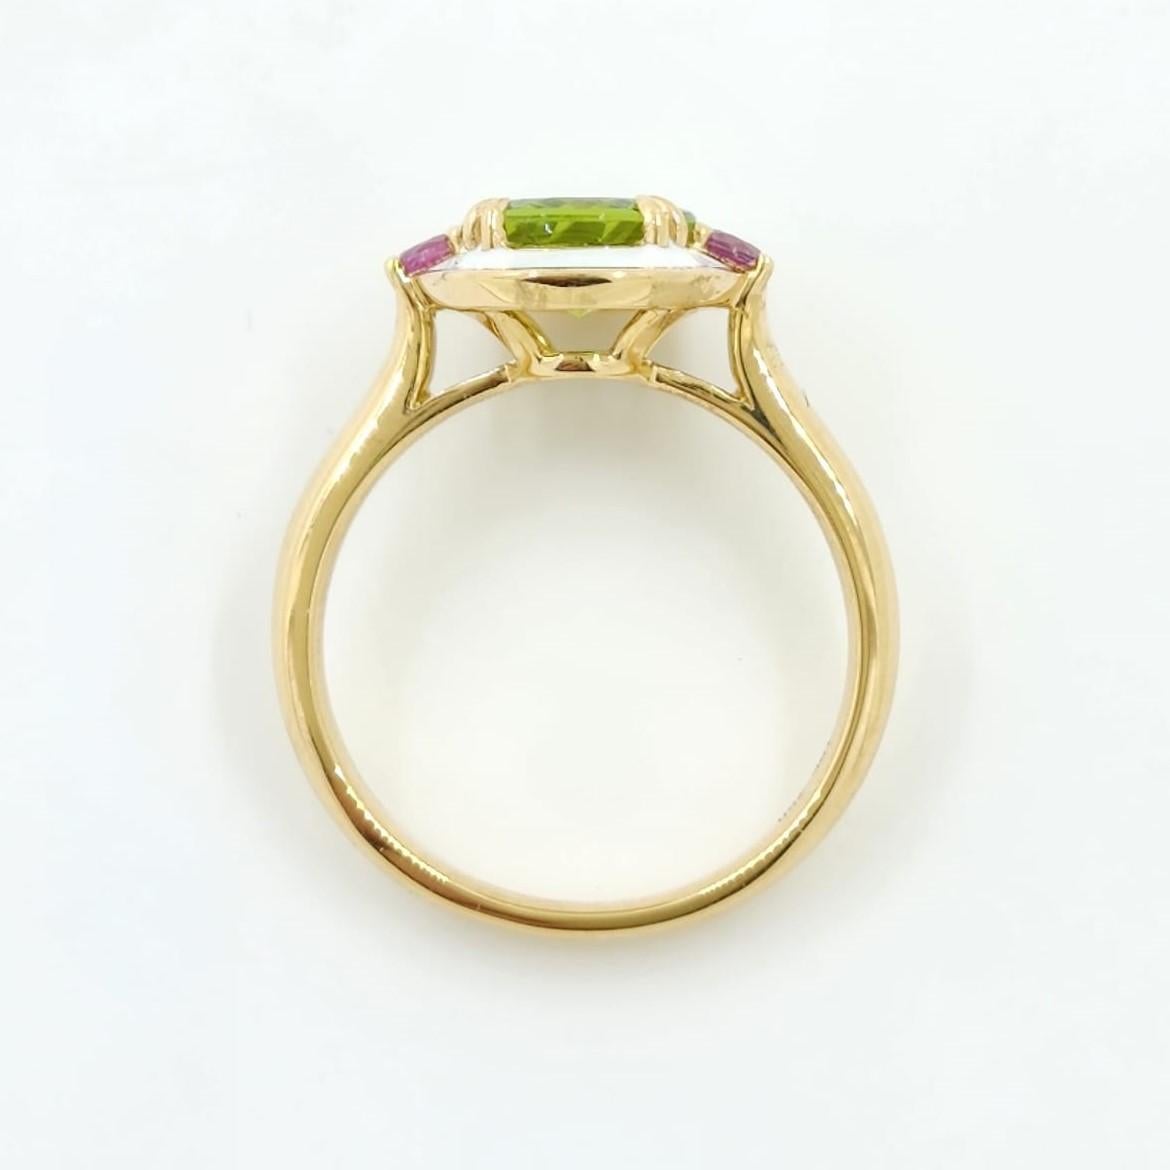 1.88 Carat Peridot Enamel Art Deco Cocktail Ring in 18k Yellow Gold For Sale 1